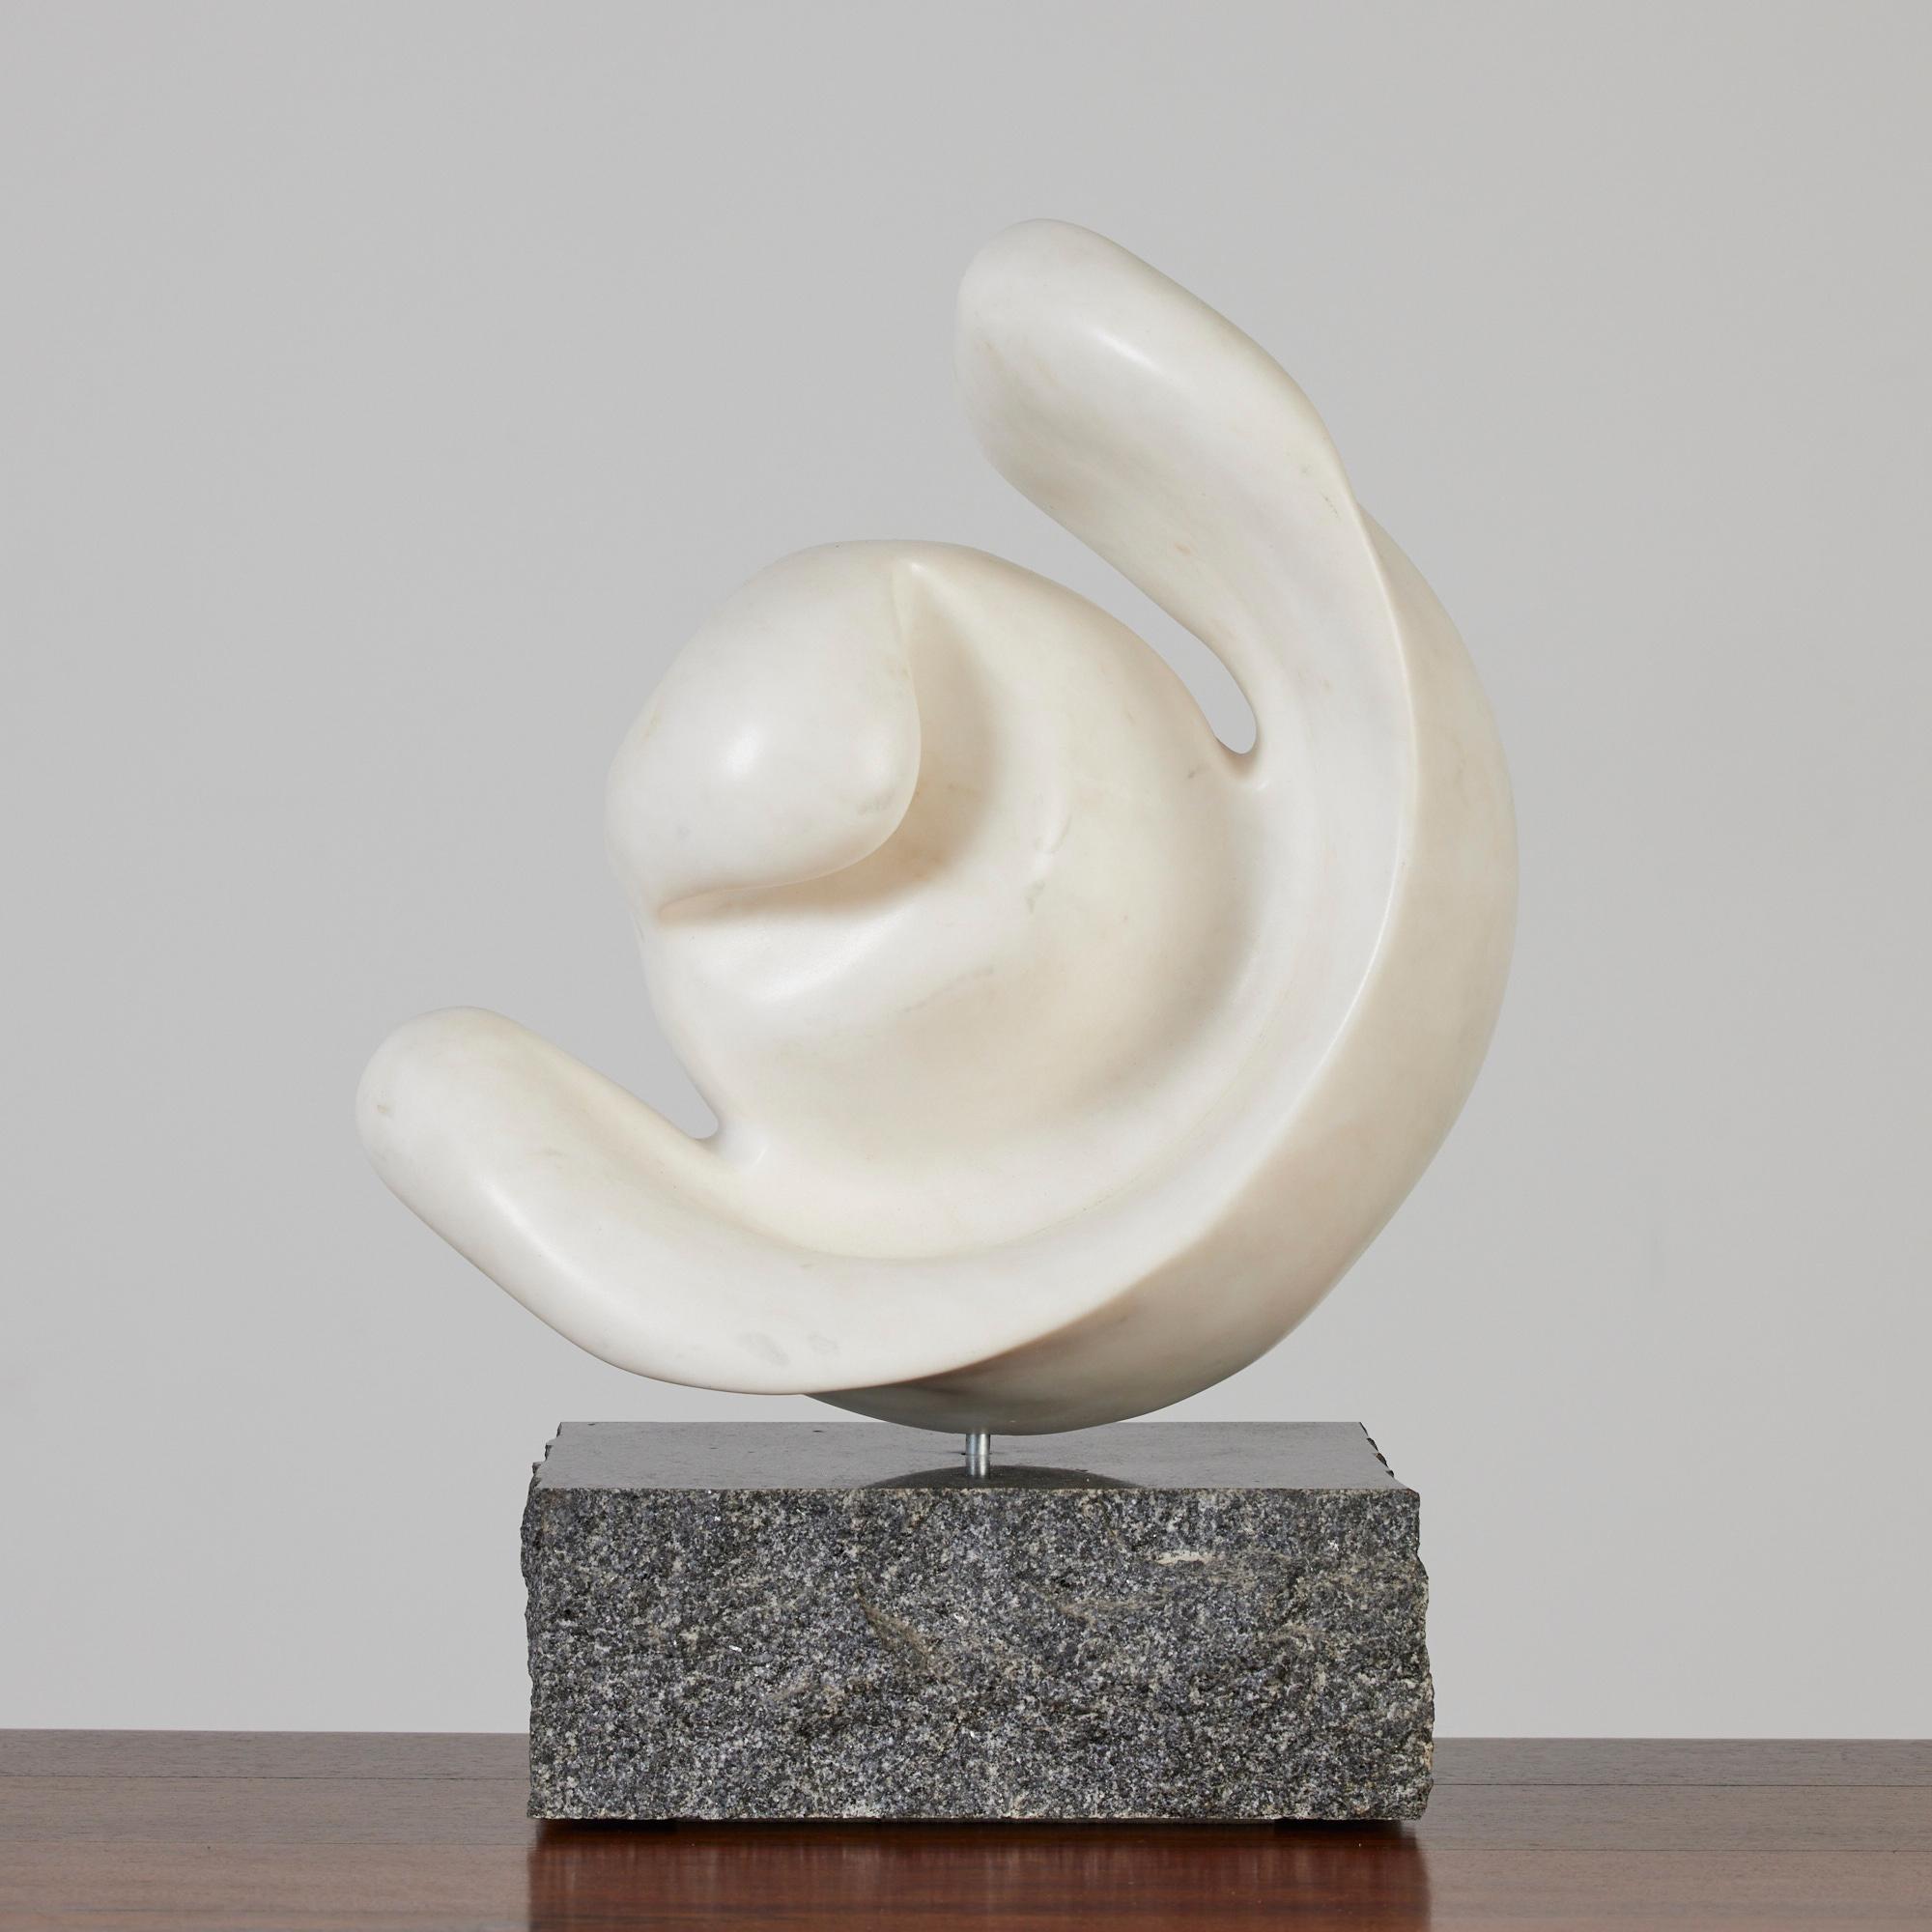 This curvaceous biomorphic marble sculpture catches your eye from all angles! The sculpture is carved from honed white marble with brown speckling throughout. The heavy granite base features a polished top and sides with a raw natural stone finish.